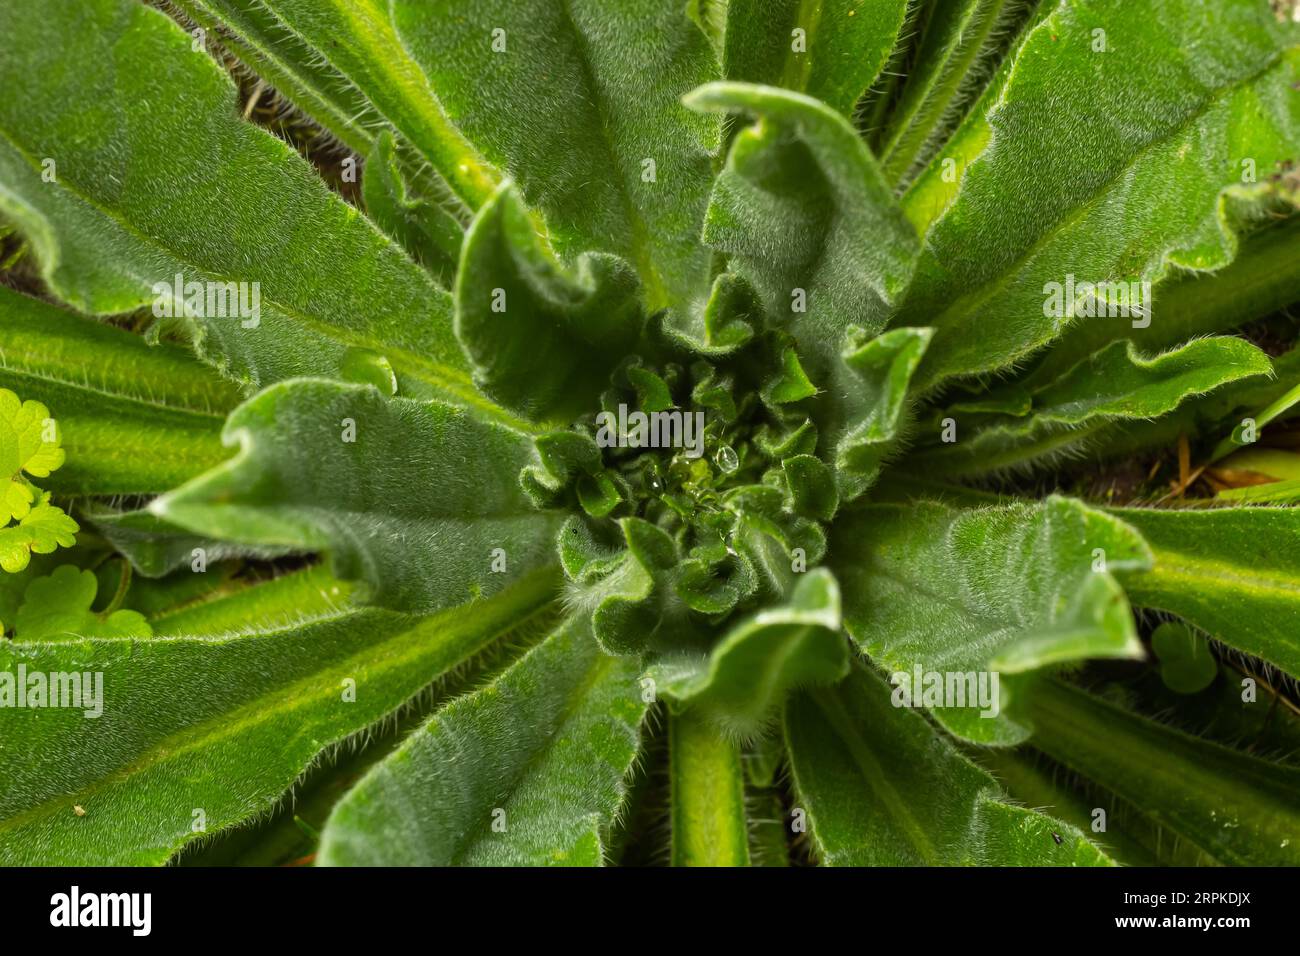 Close-up of hairy rosette with dew drops and fallen leaves of Verbascum thapsus large or common mullein in its first year of growth. Stock Photo